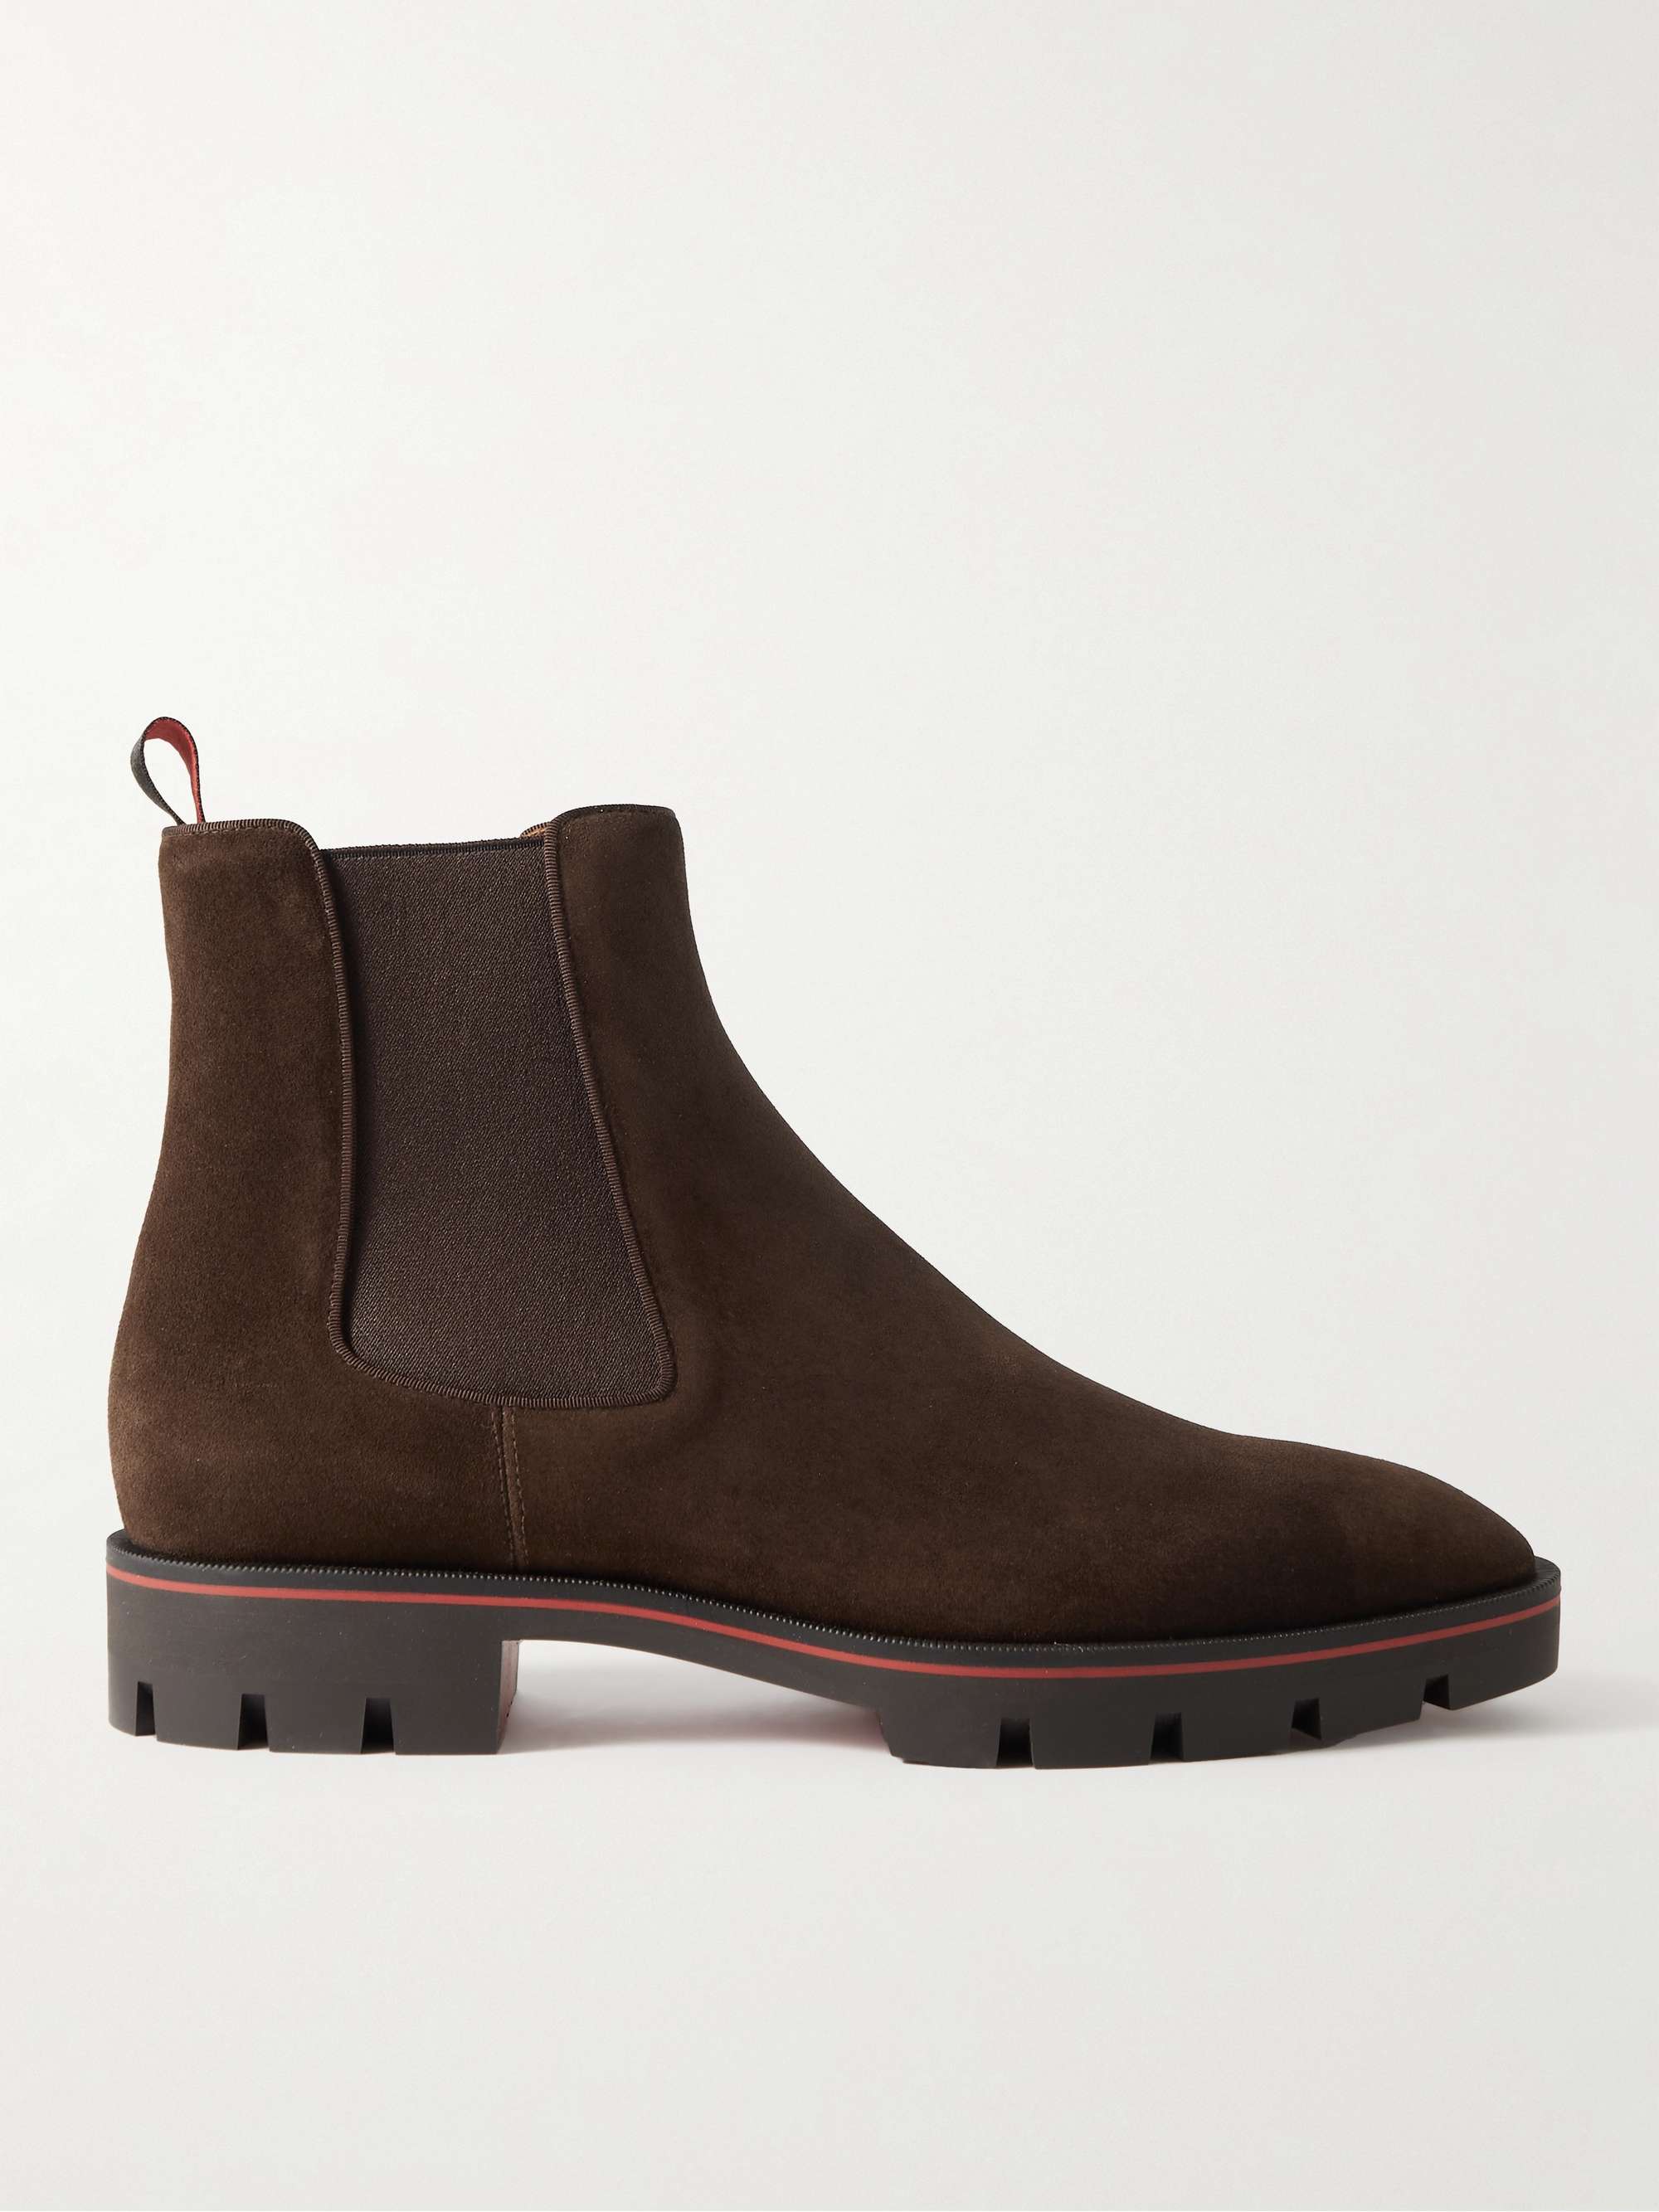 CHRISTIAN LOUBOUTIN Alpino Suede Chelsea Boots for Men | MR PORTER